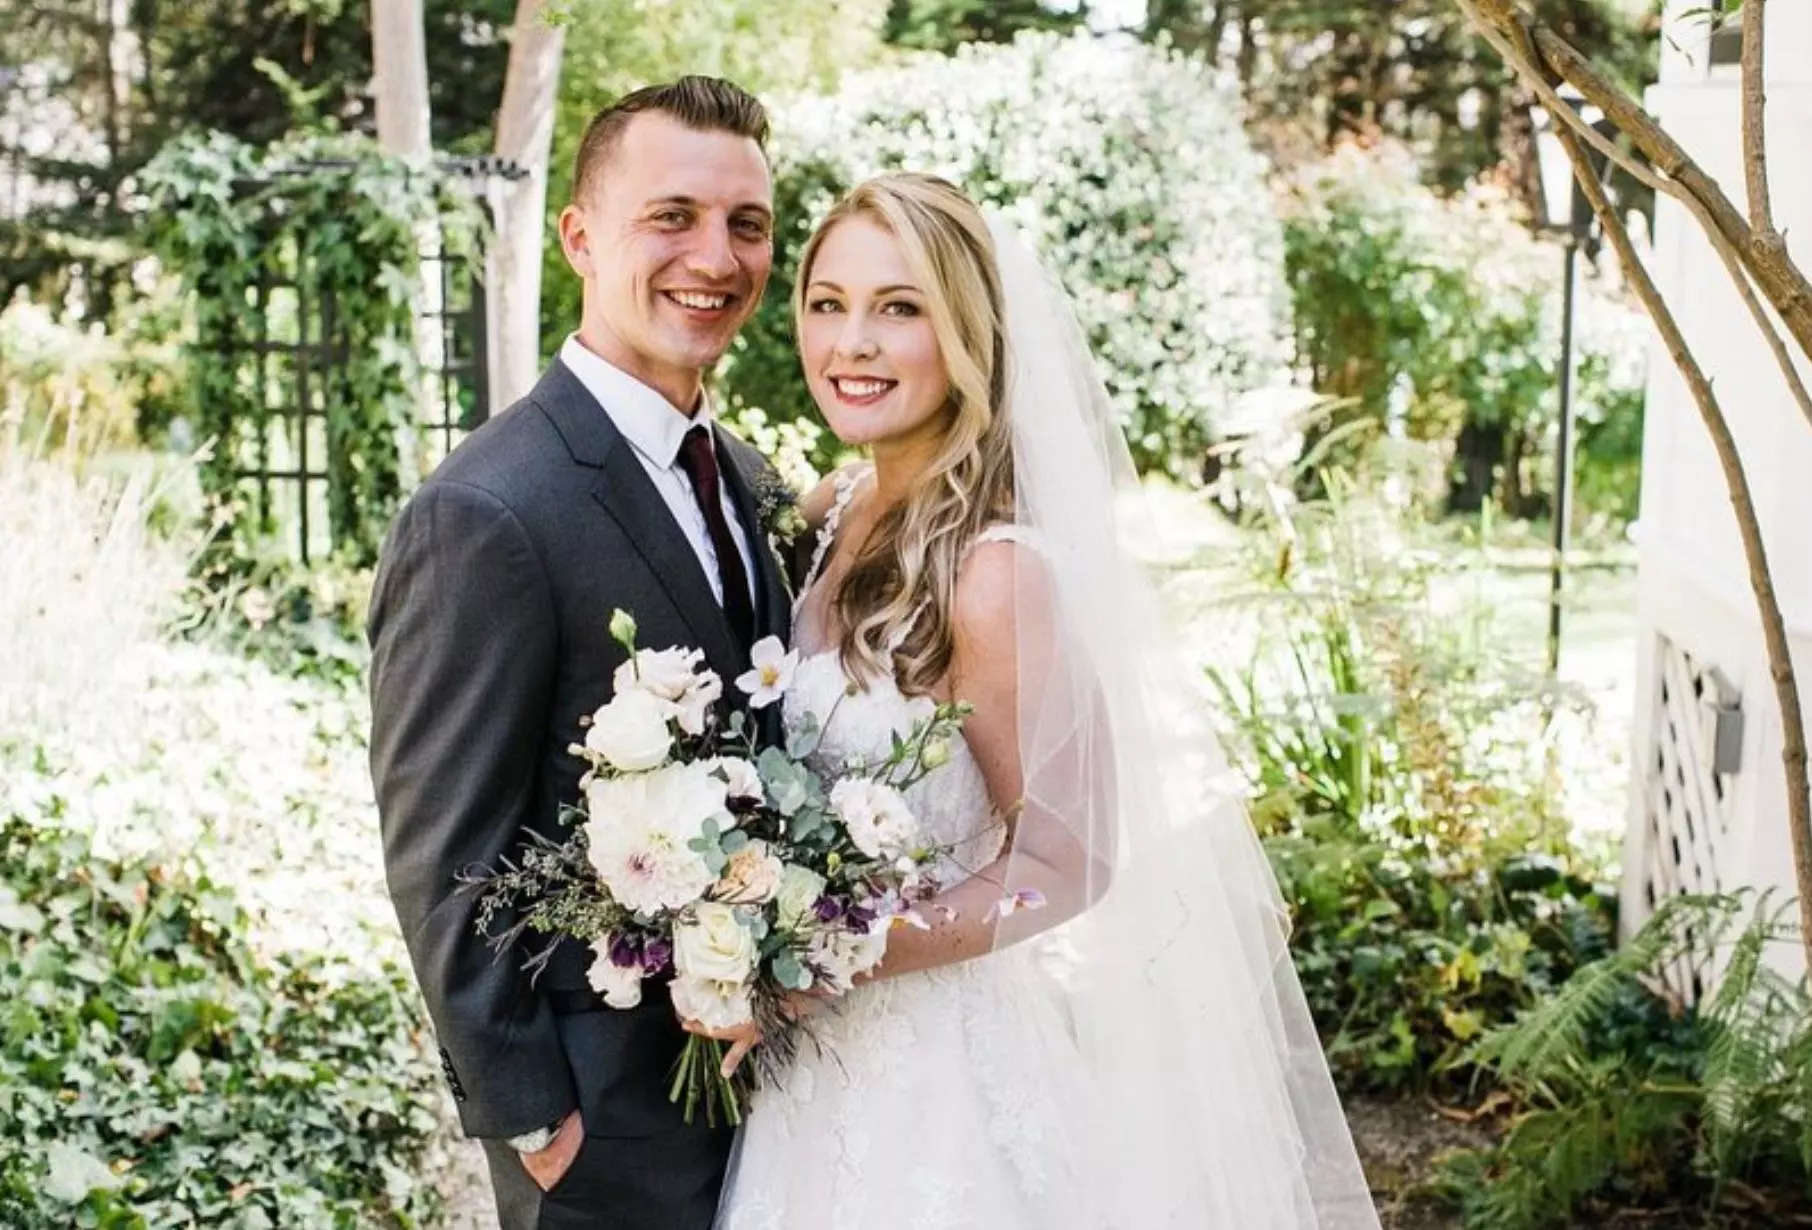 Aaron Quinn and Denise Huskins on their wedding day in 2018.